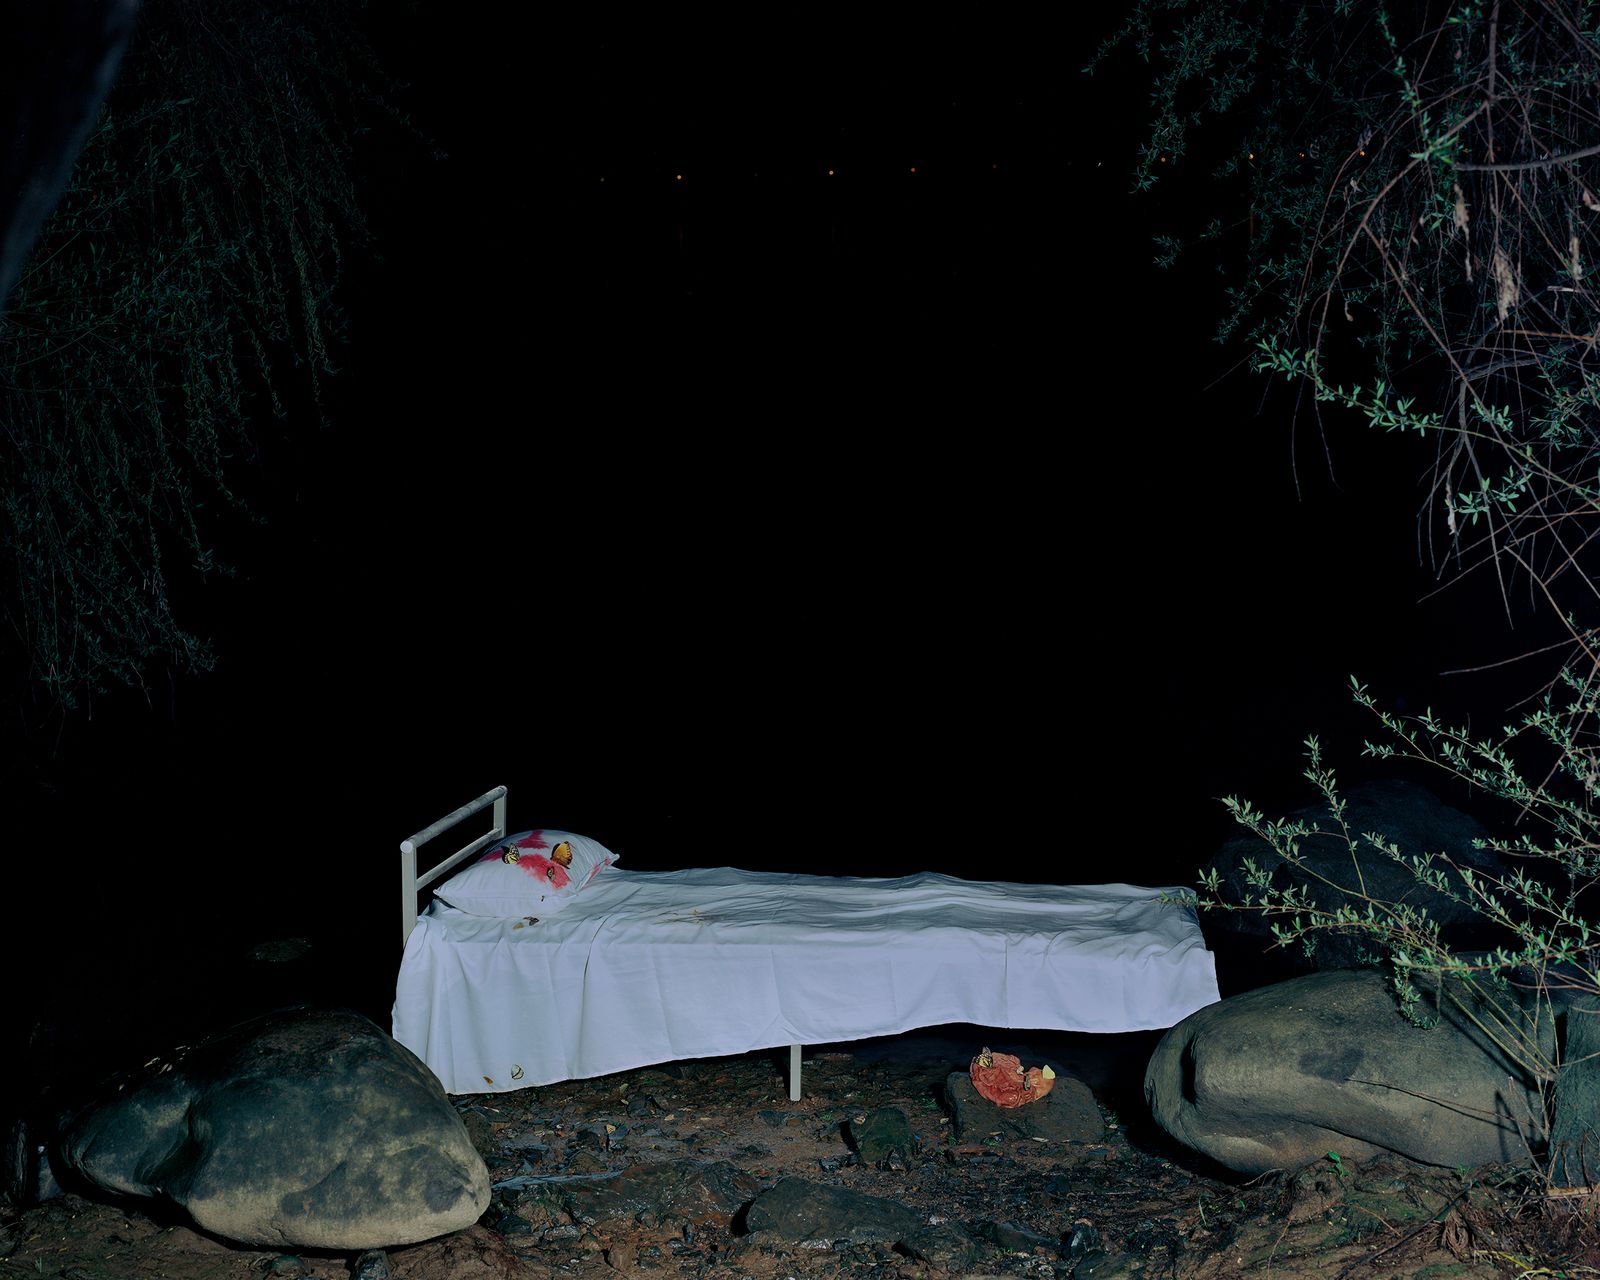 © Bowei Yang - The aching bed by the river, Tommy and his painting, color darkroom print, 2021.